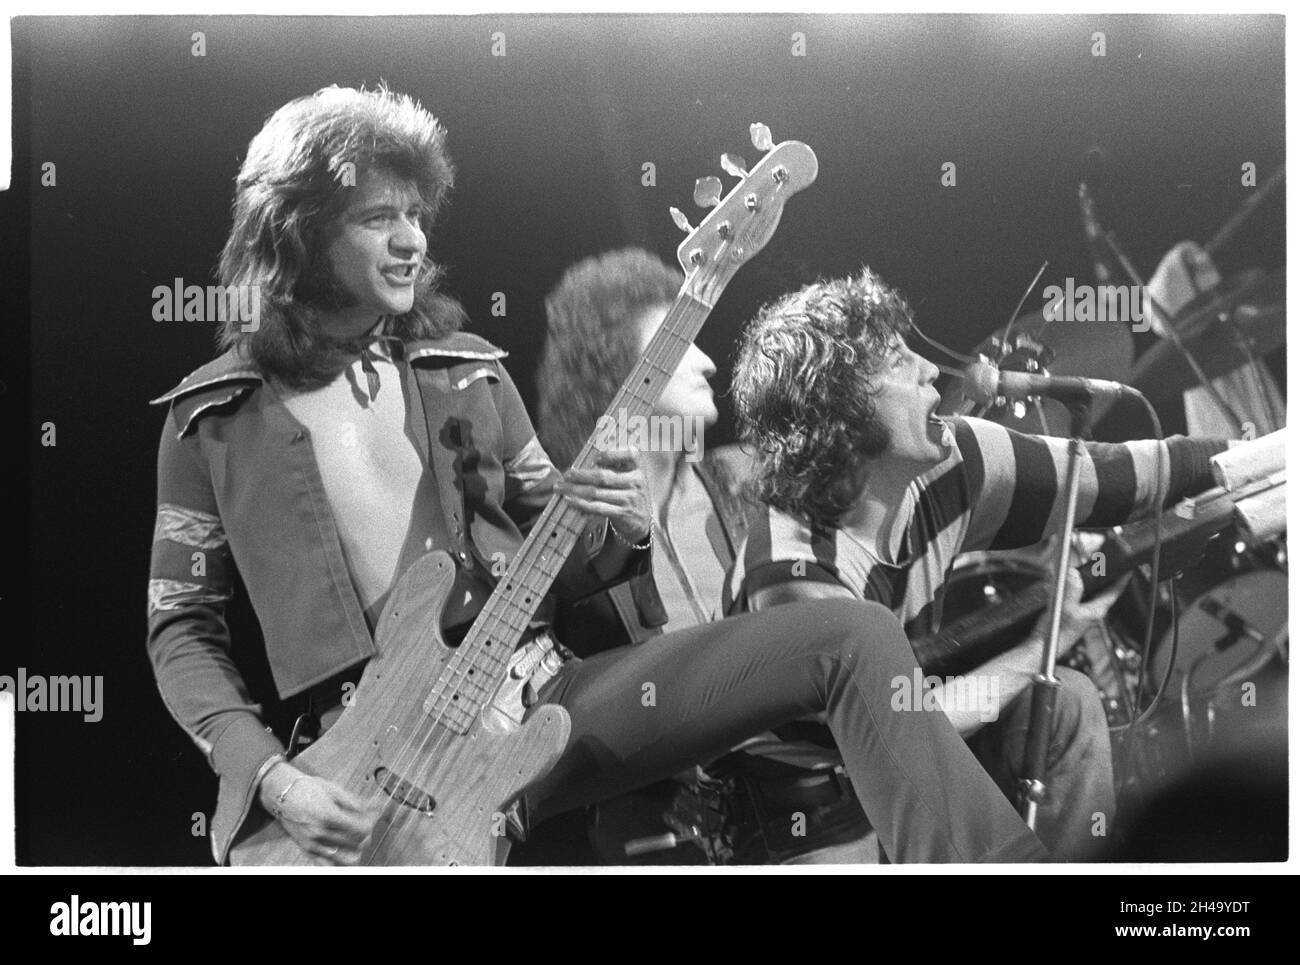 The Sensational Alex Harvey Band, Sheffield City Hall May 13.1975. Live images of the bands sold out tour in Britain. More images available if needed. Black and white. Stock Photo